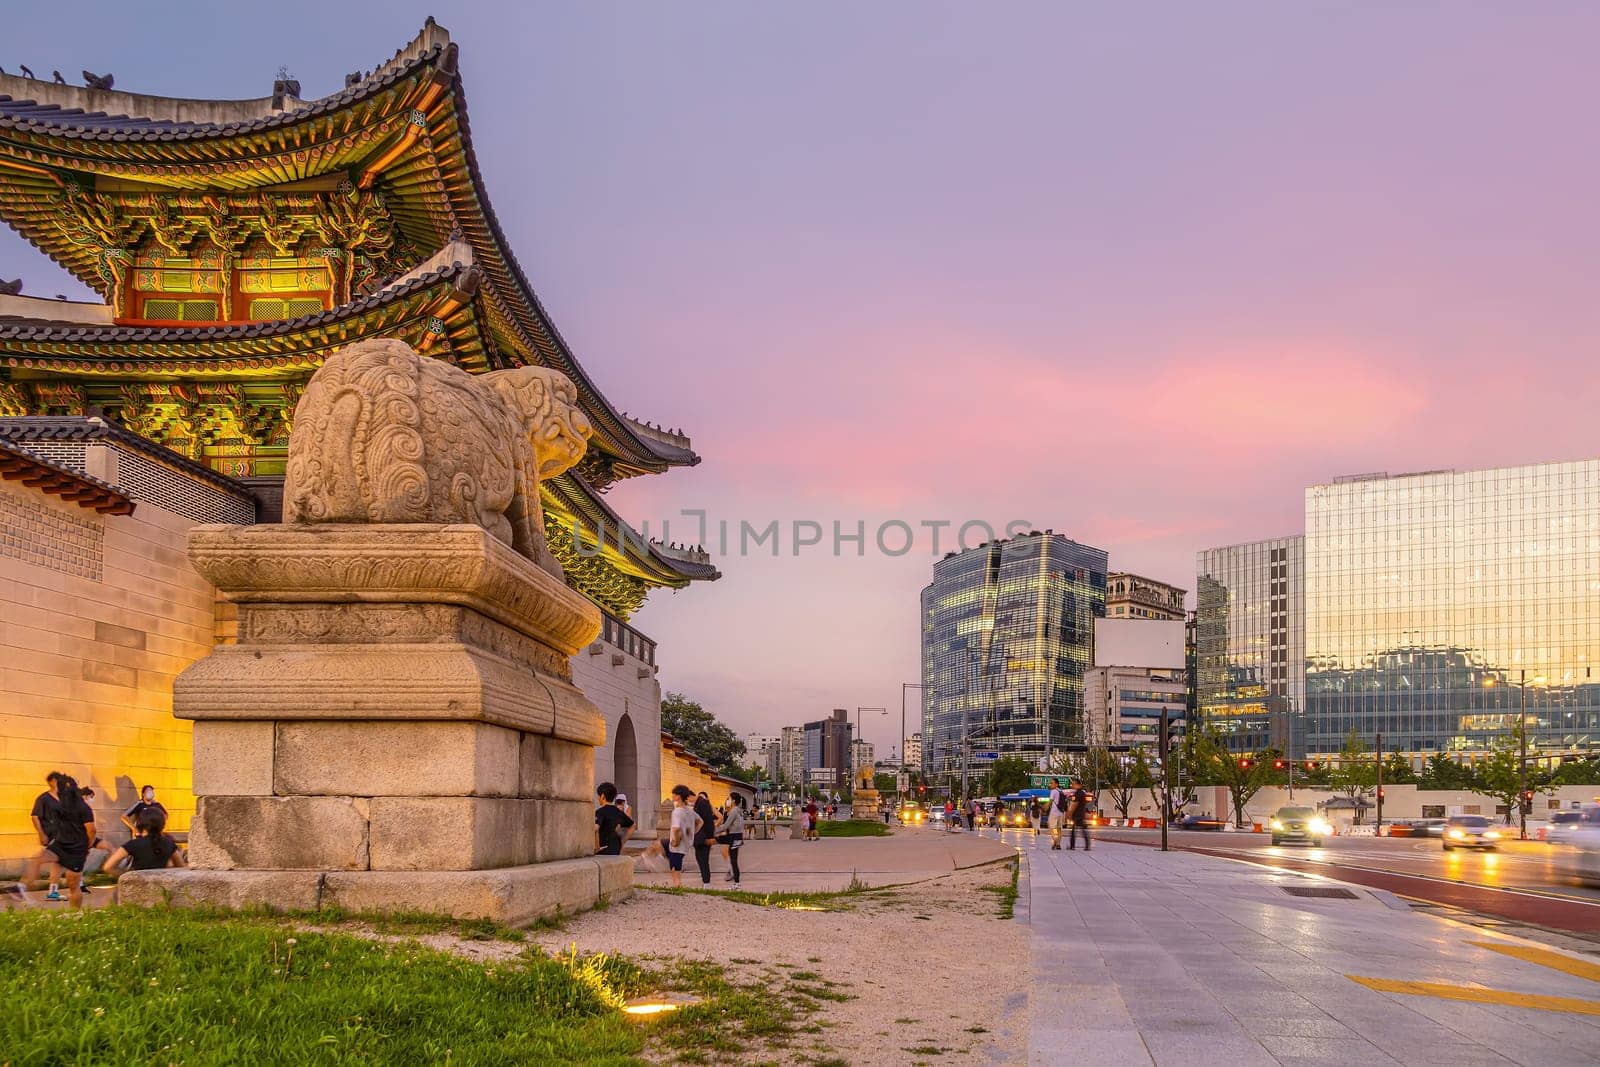 Gyeongbokgung Palace in downtown Seoul at sunset by f11photo